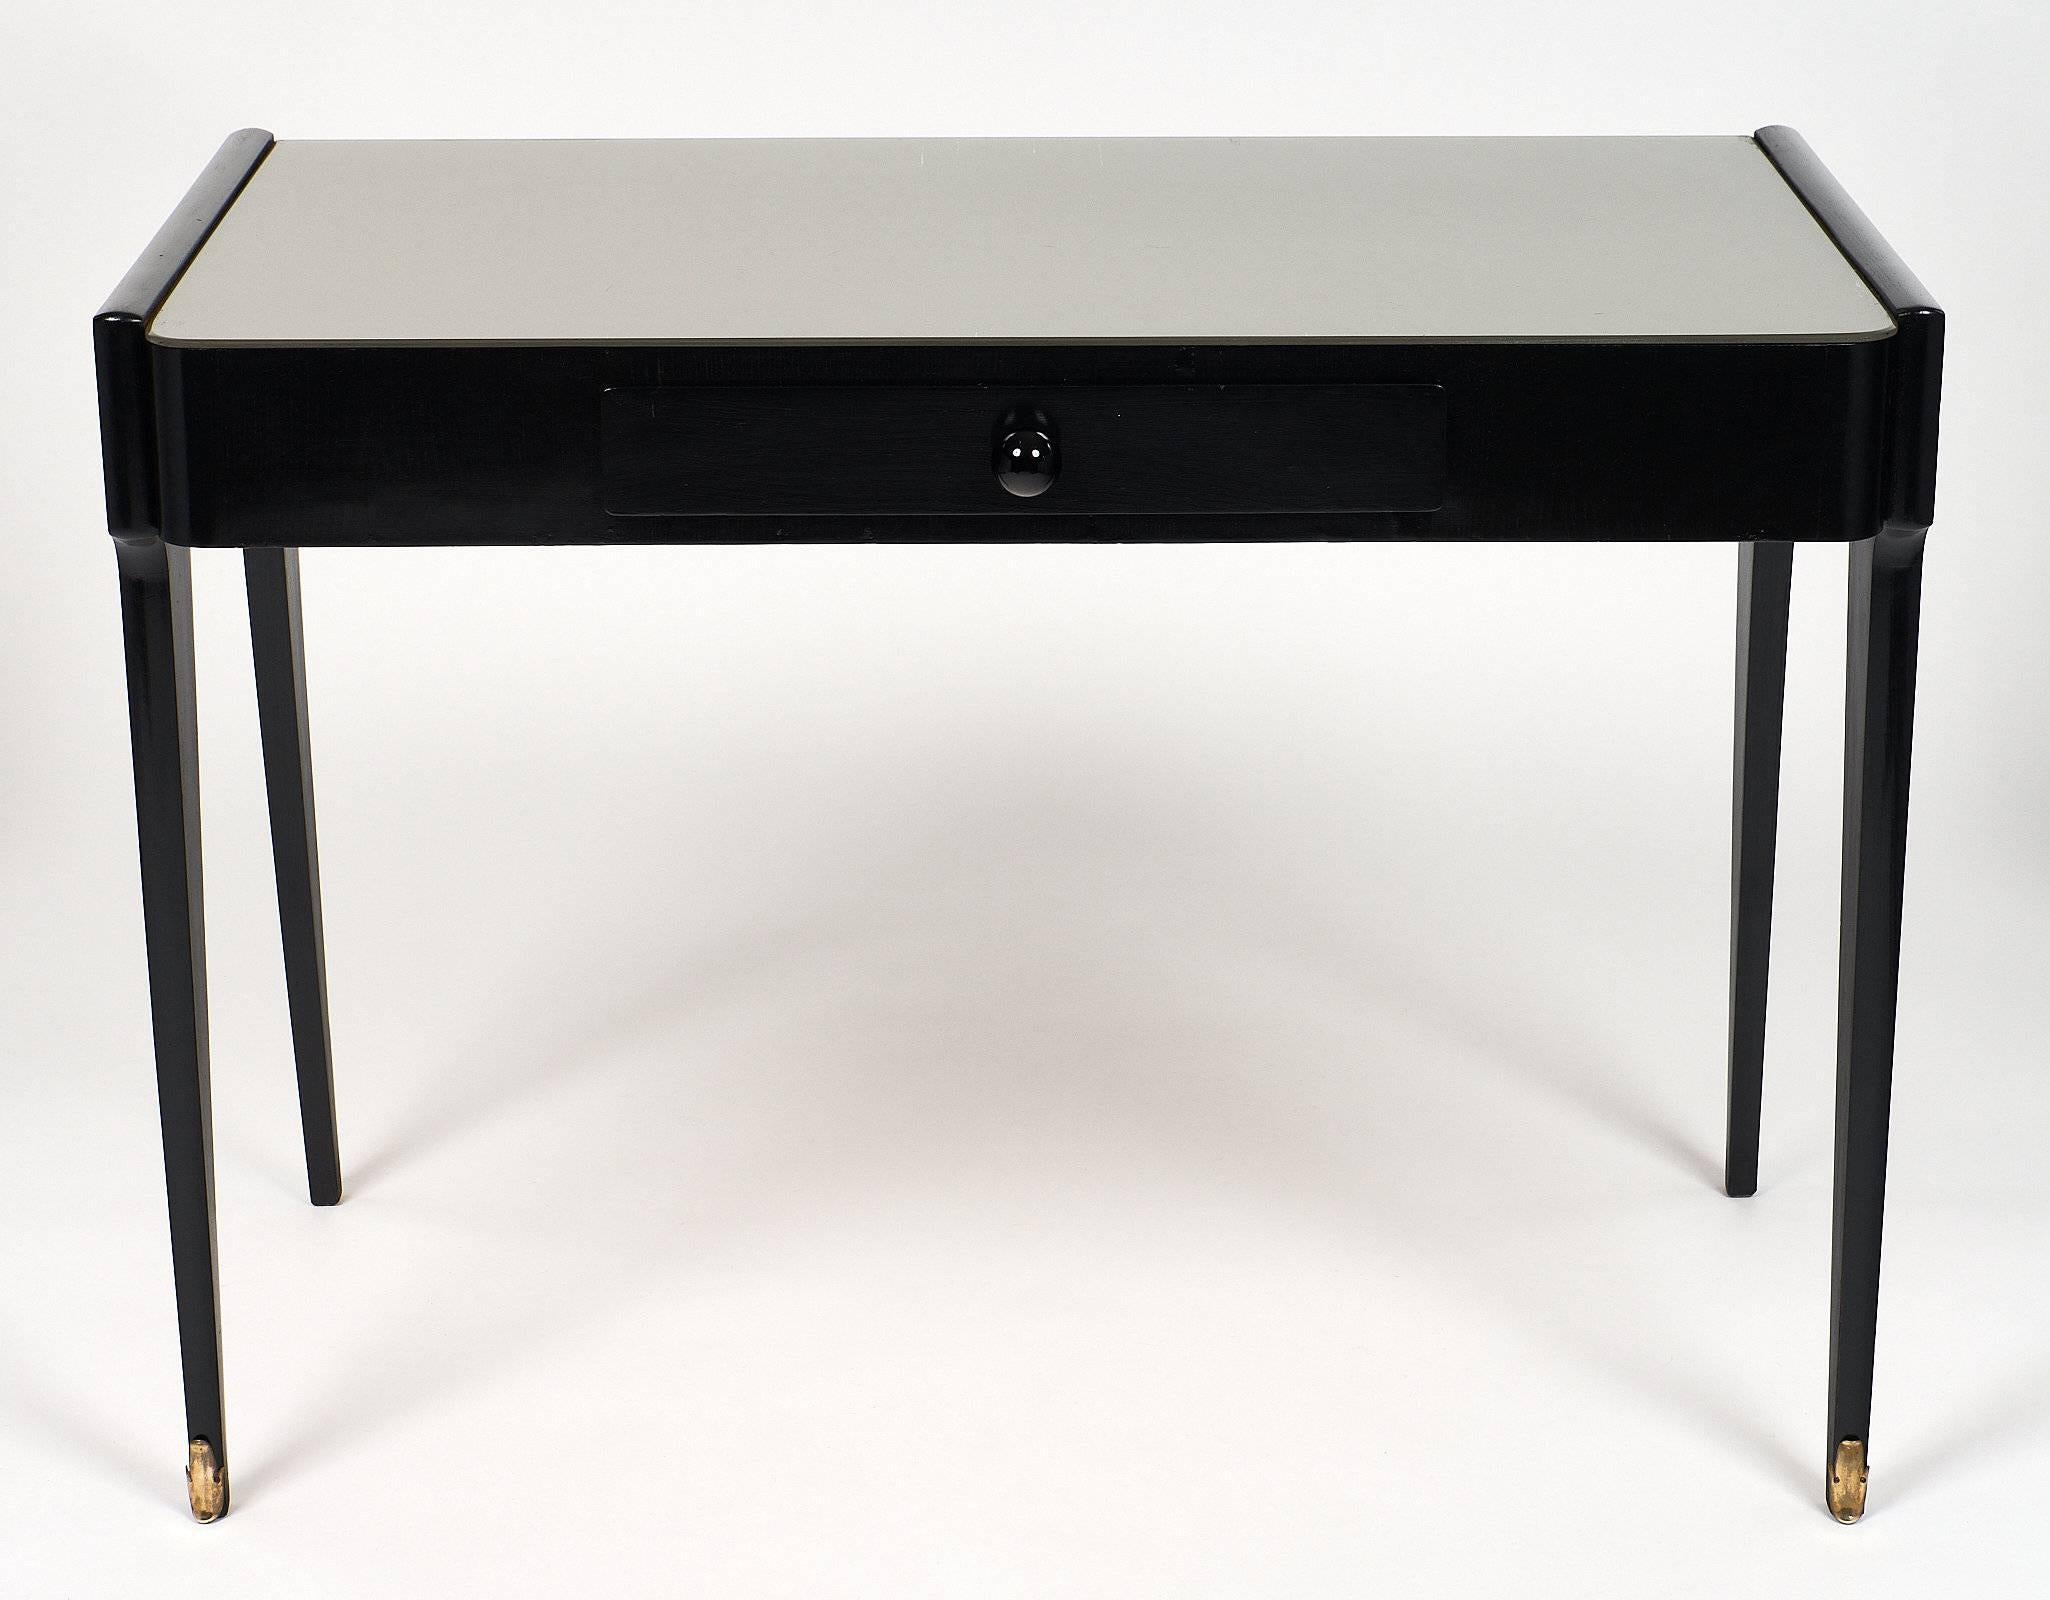 Italian mid-century desk made of ebonized mahogany that has been finished with a French polish for a lustrous appearance. The top is covered with glass that has a frosted, metallic coloring. The front of the desk has one drawer with a Murano black